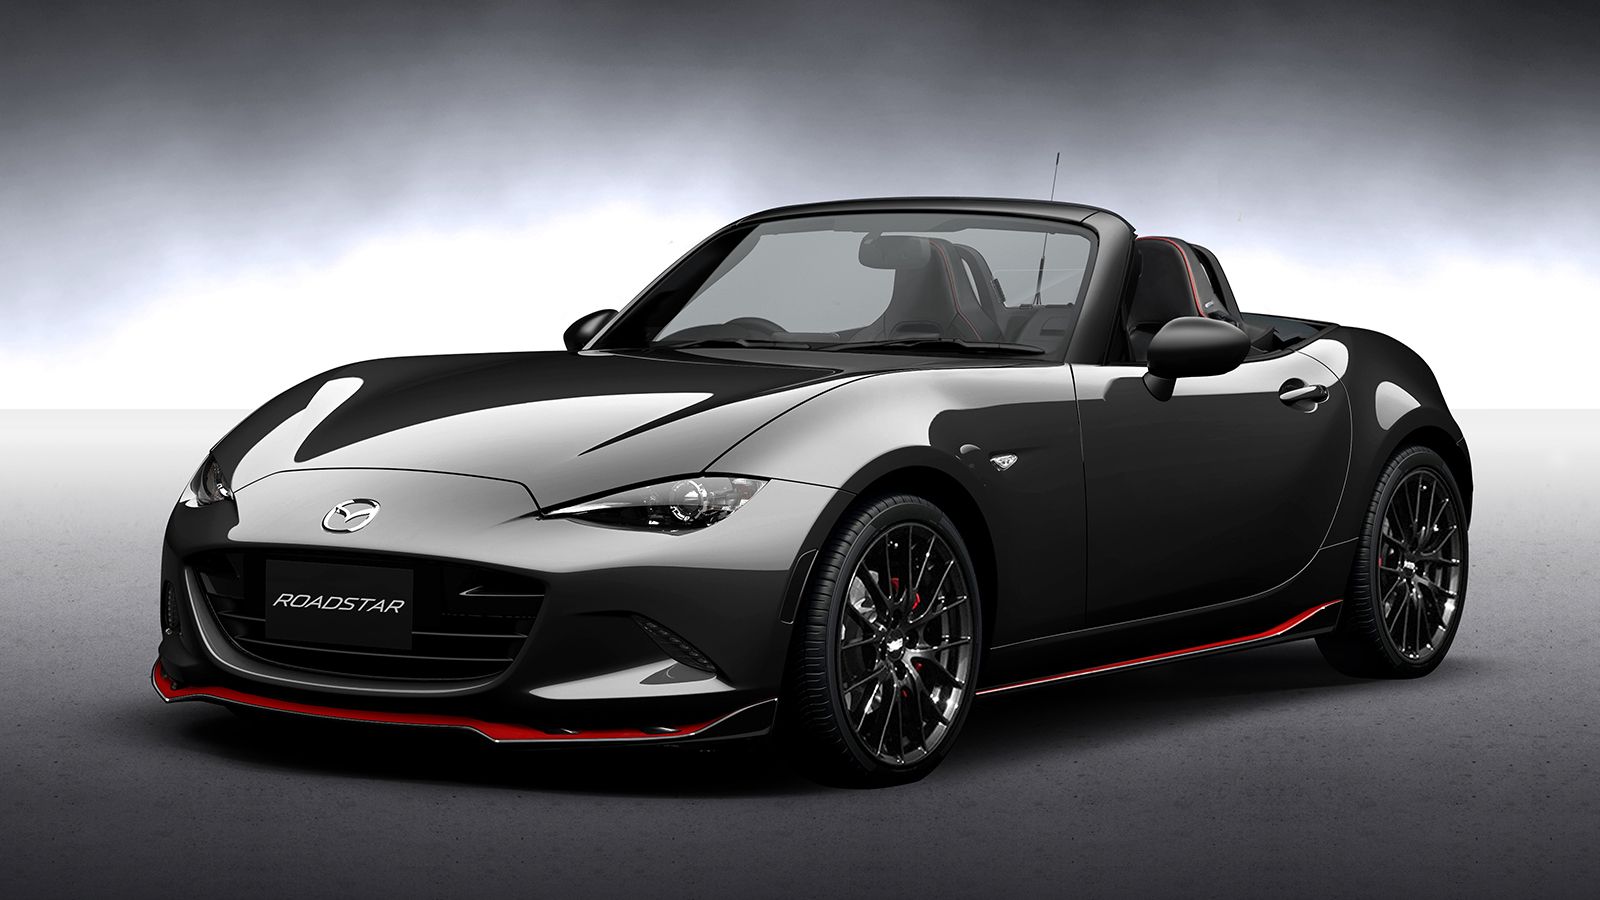 2016 Mazda Roadster RS Racing Concept